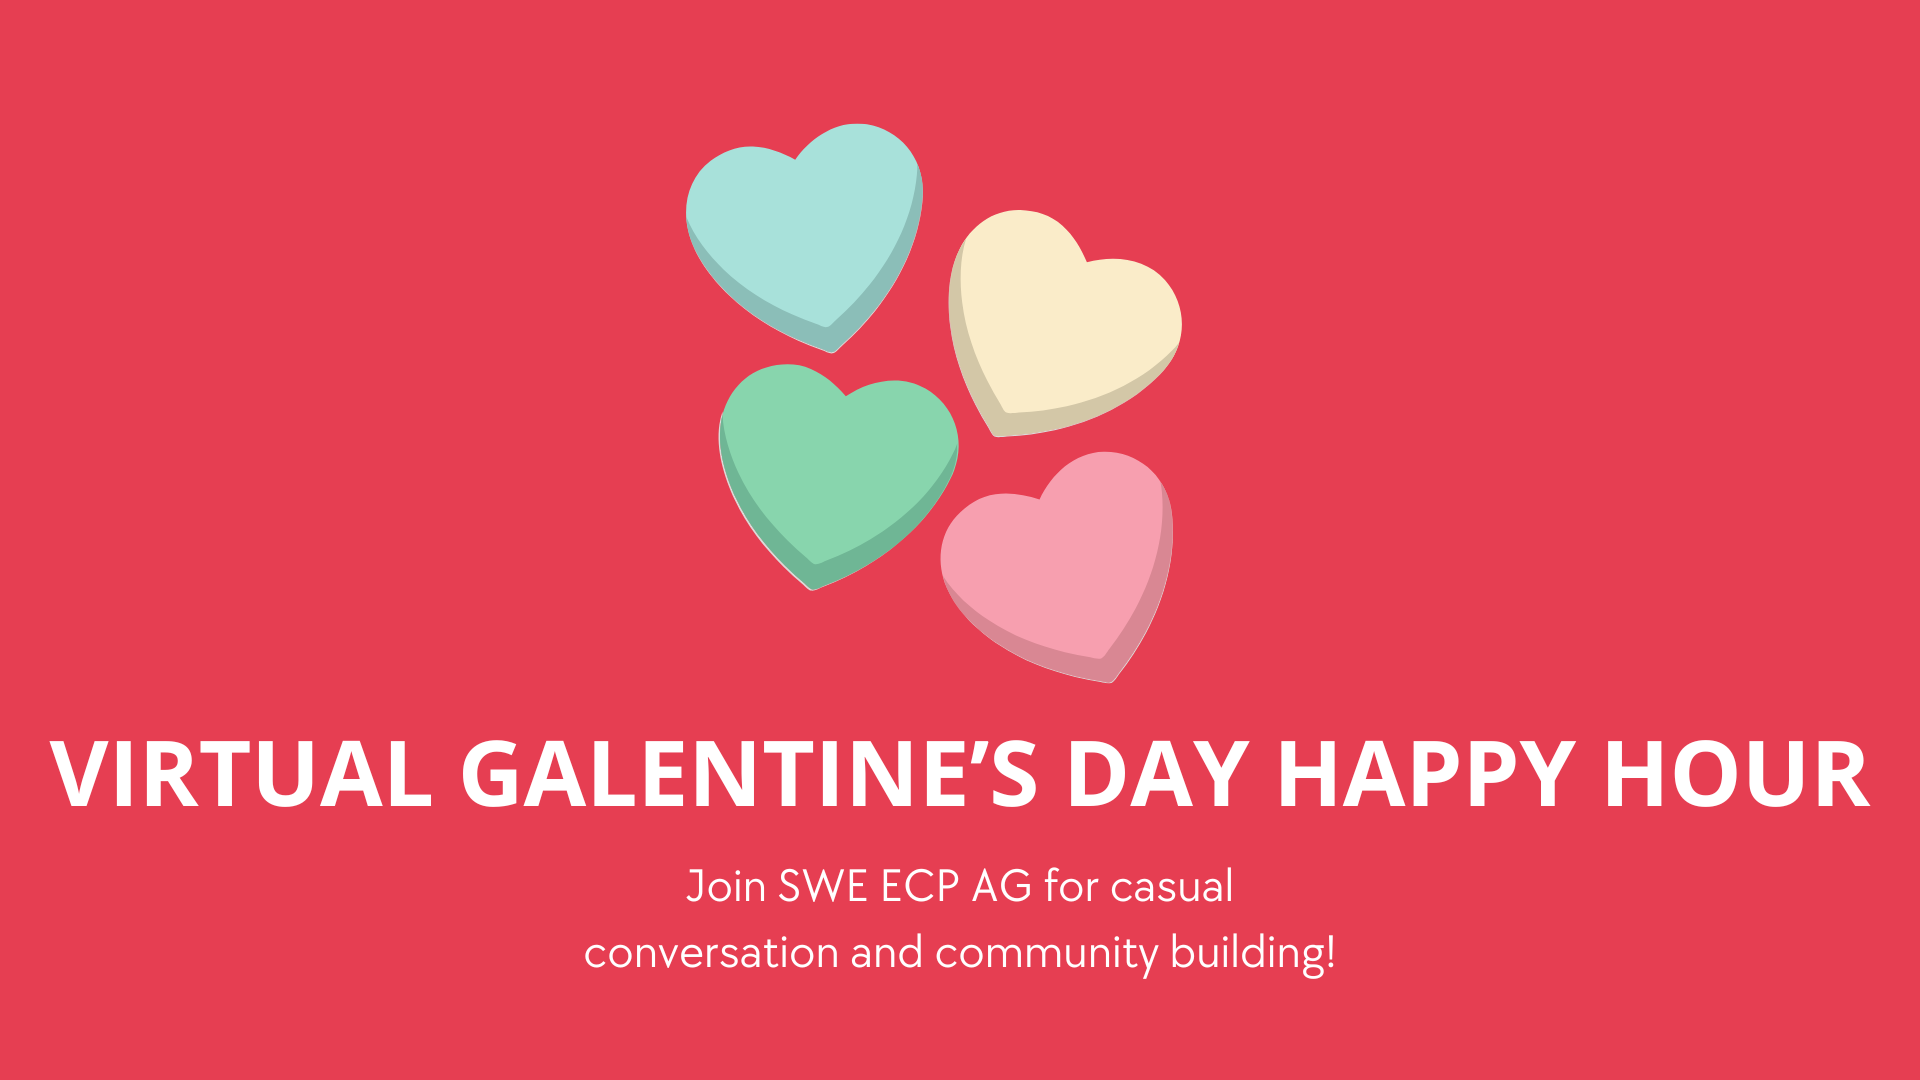 Copy of Virtual Galentines Happy Hour Presentation png